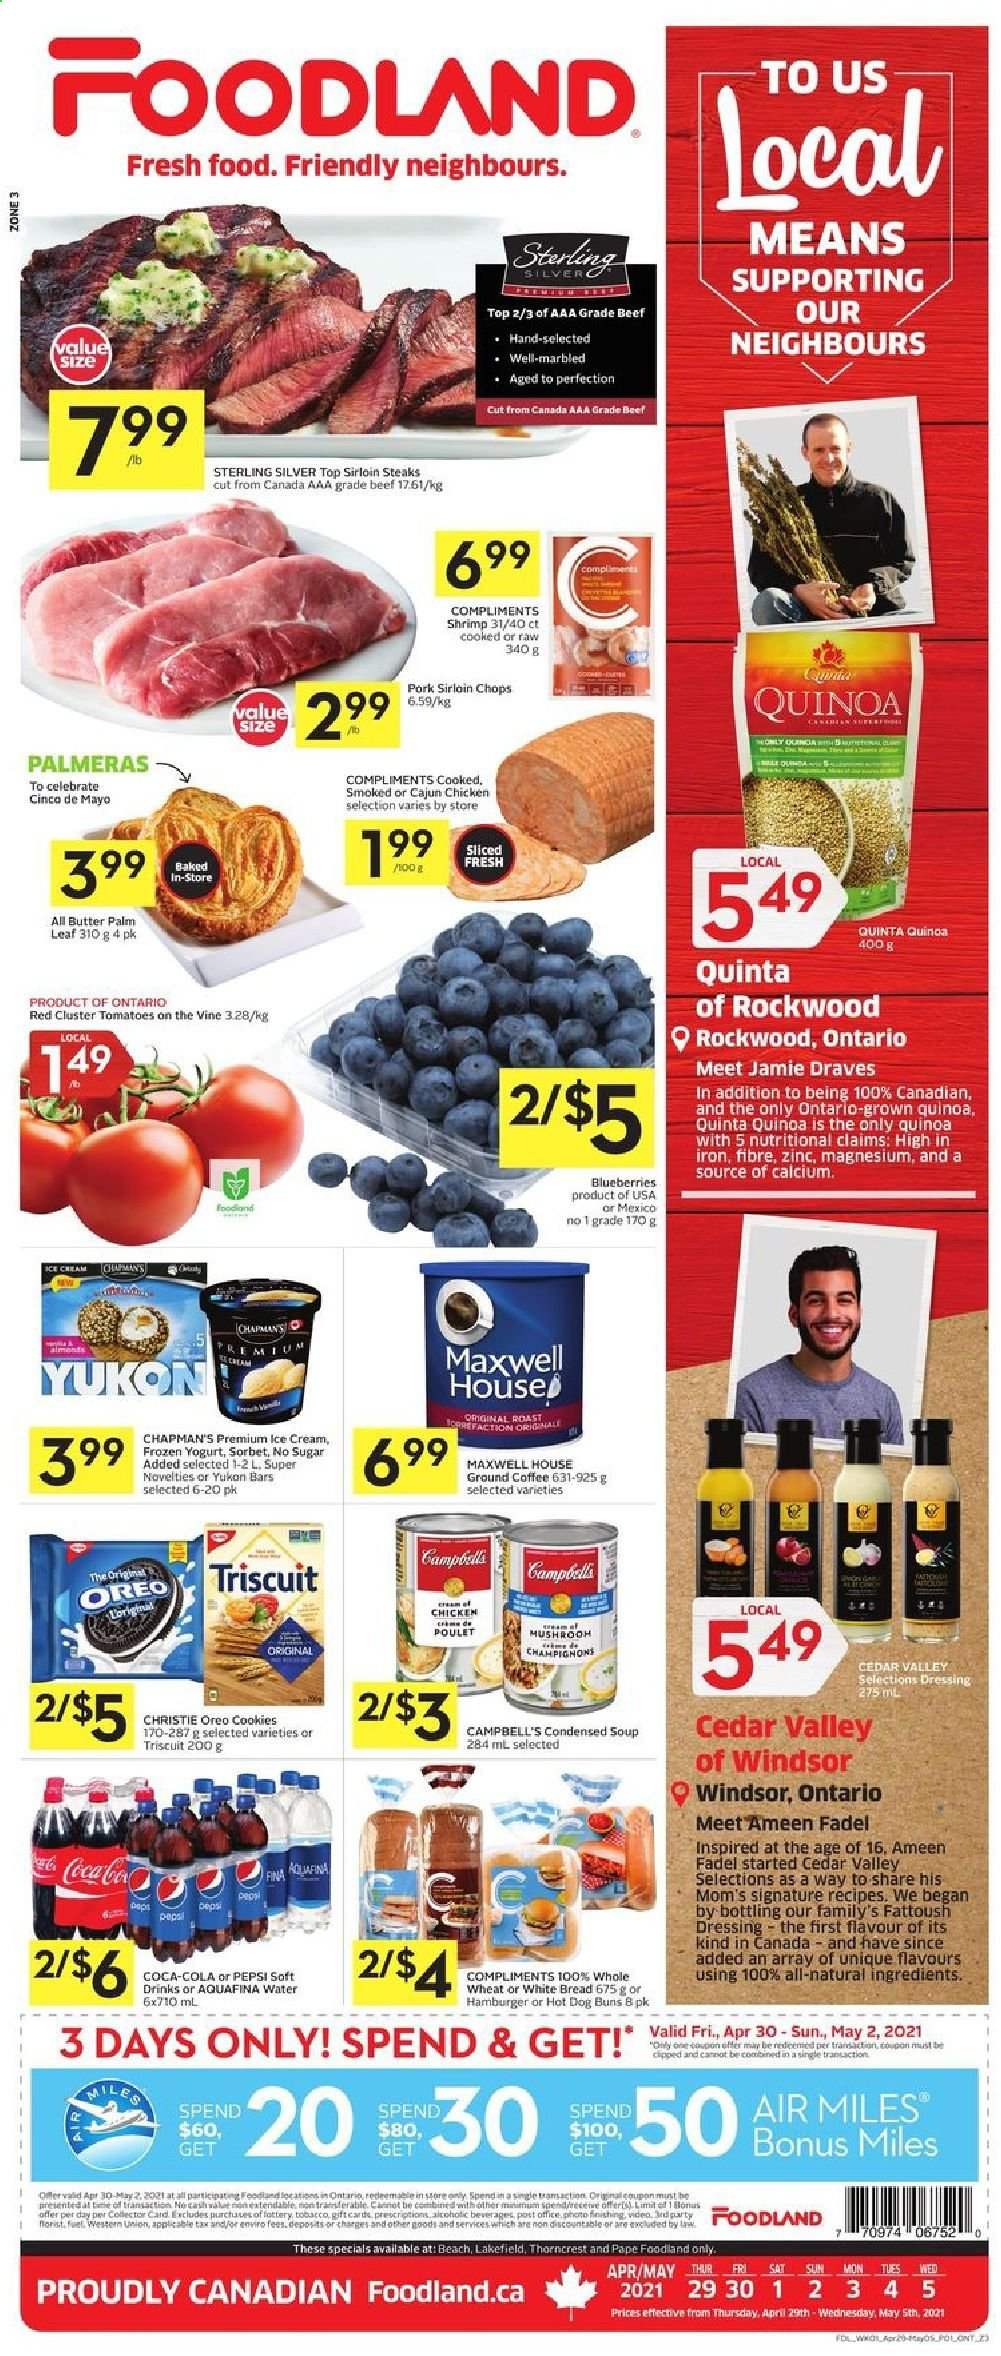 thumbnail - Foodland Flyer - April 29, 2021 - May 05, 2021 - Sales products - white bread, buns, shrimps, Campbell's, condensed soup, soup, instant soup, Oreo, yoghurt, cookies, dressing, Coca-Cola, Pepsi, soft drink, Aquafina, Maxwell House, coffee, ground coffee, sirloin steak, pork loin, magnesium, zinc, quinoa, steak. Page 1.